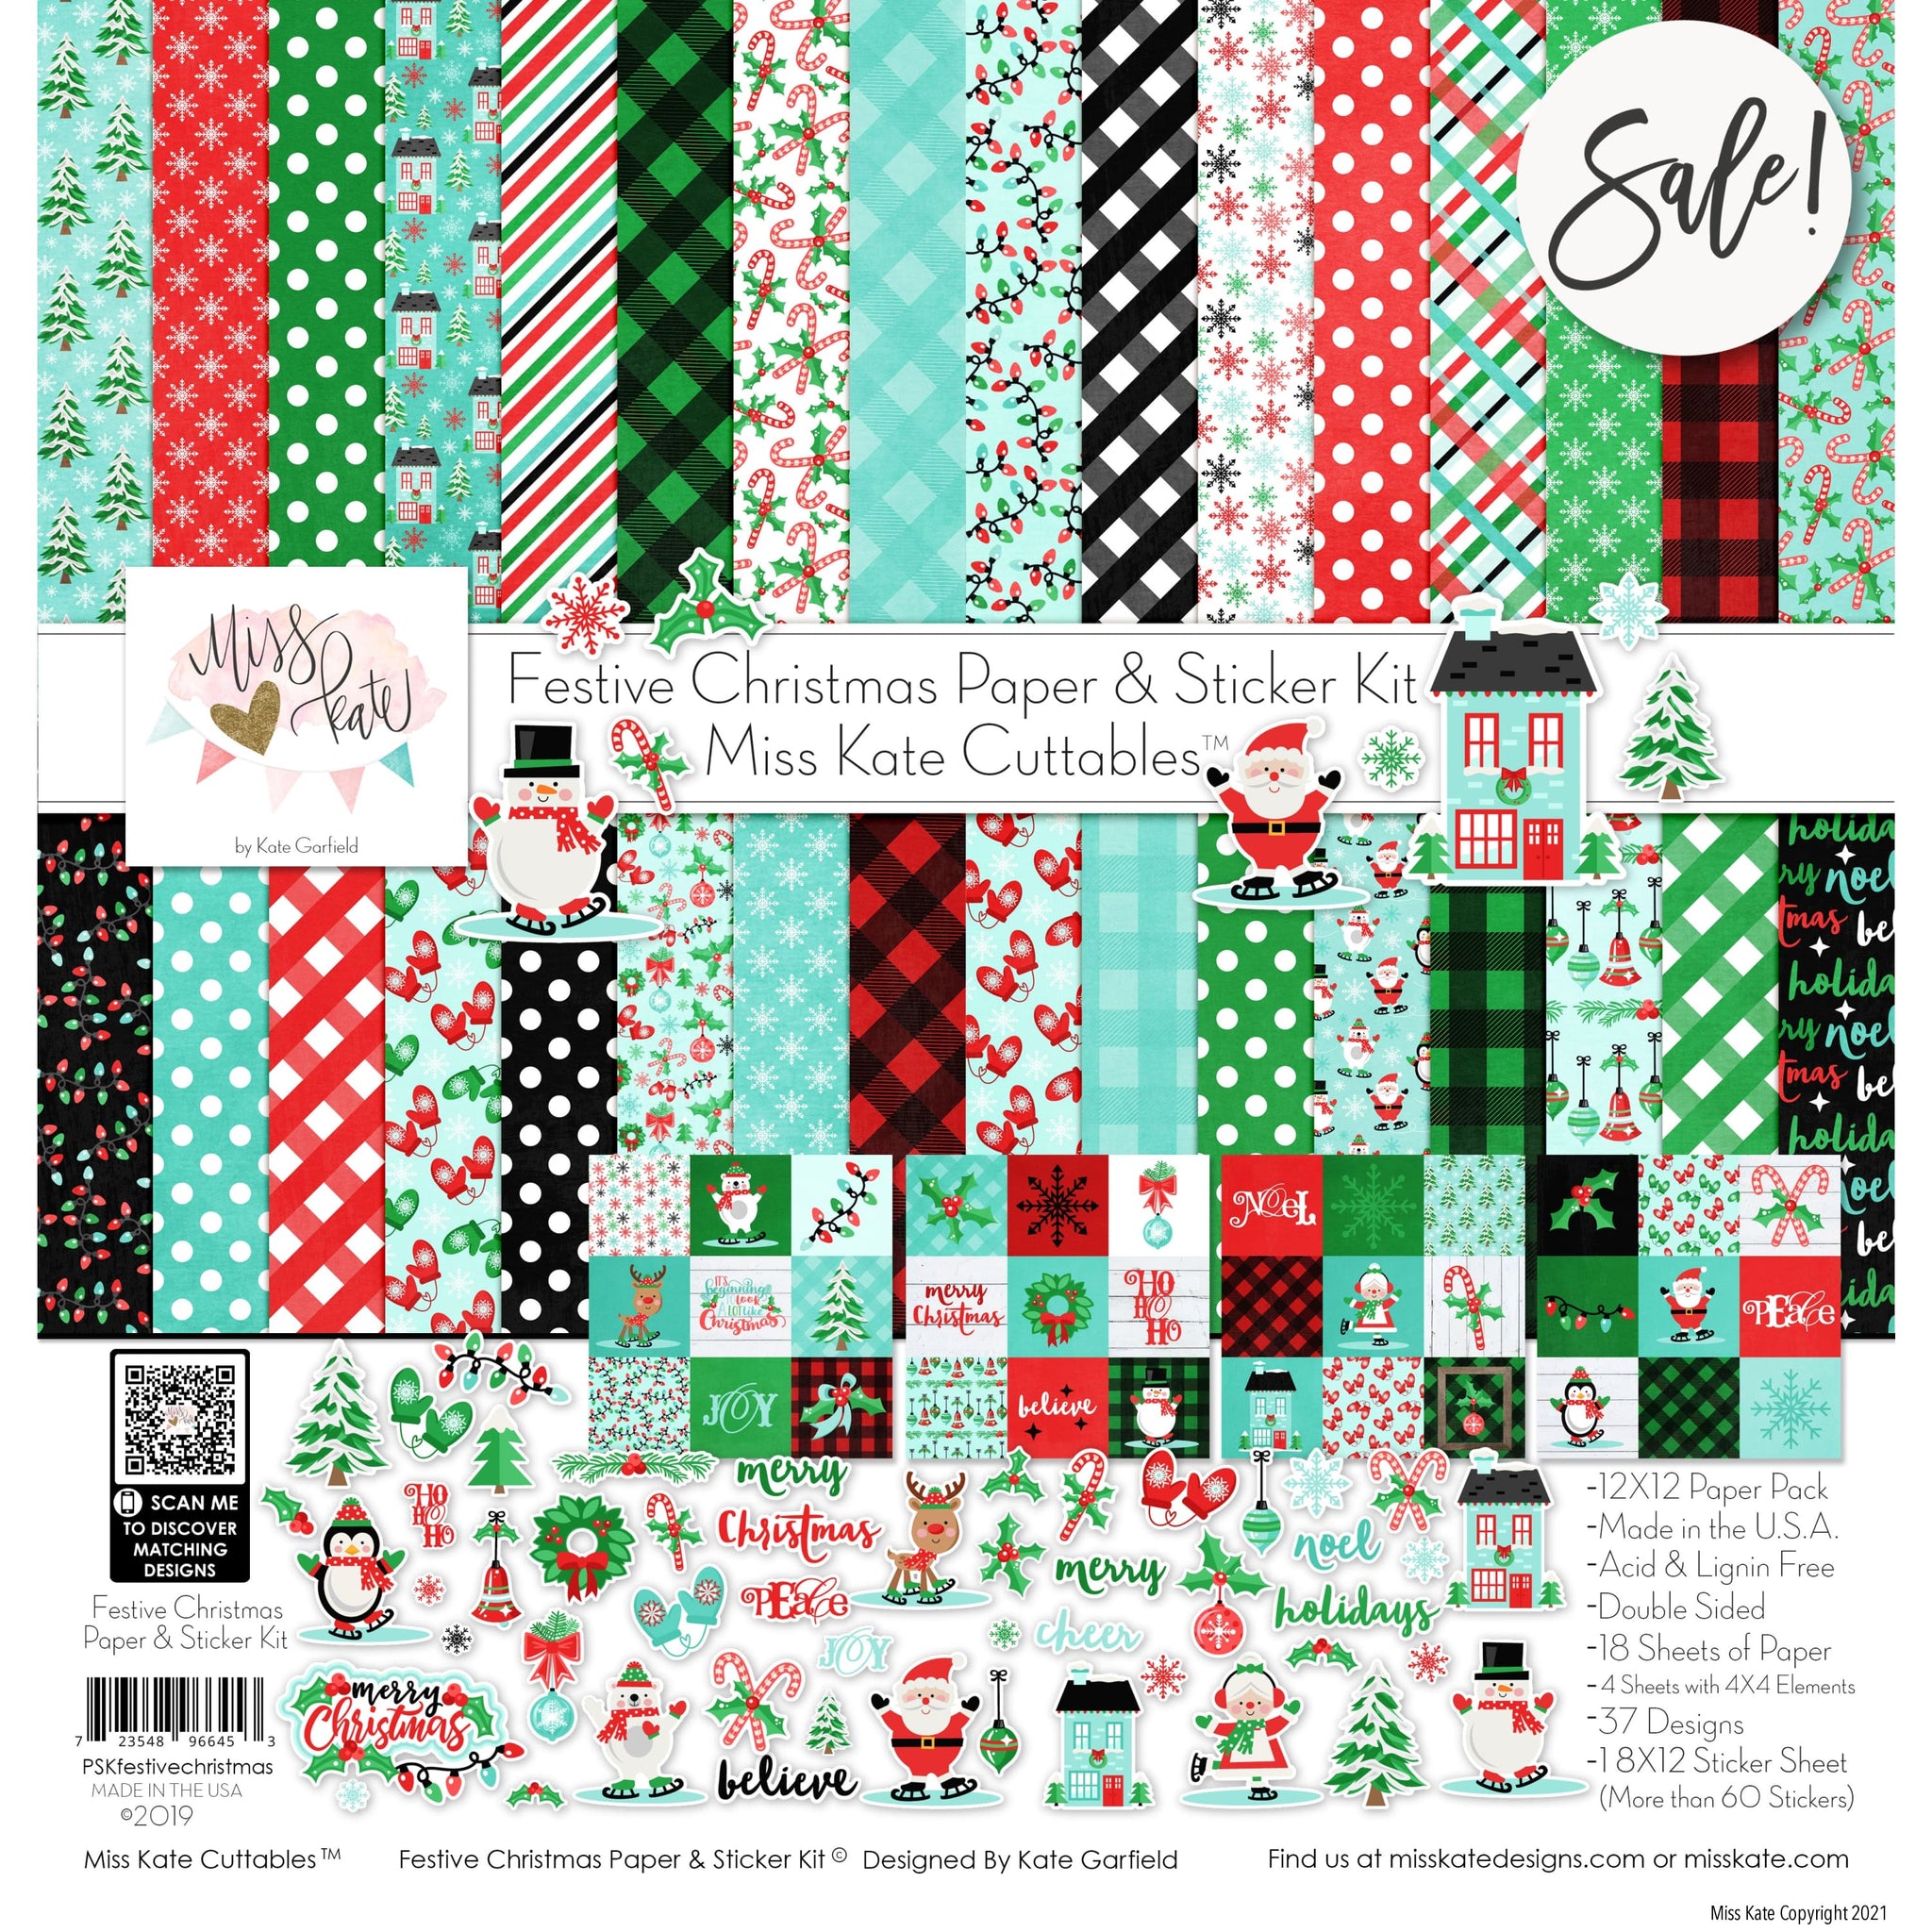 Joyful Christmas Stickers for Card Making and Scrapbooking – ViVi Stationery